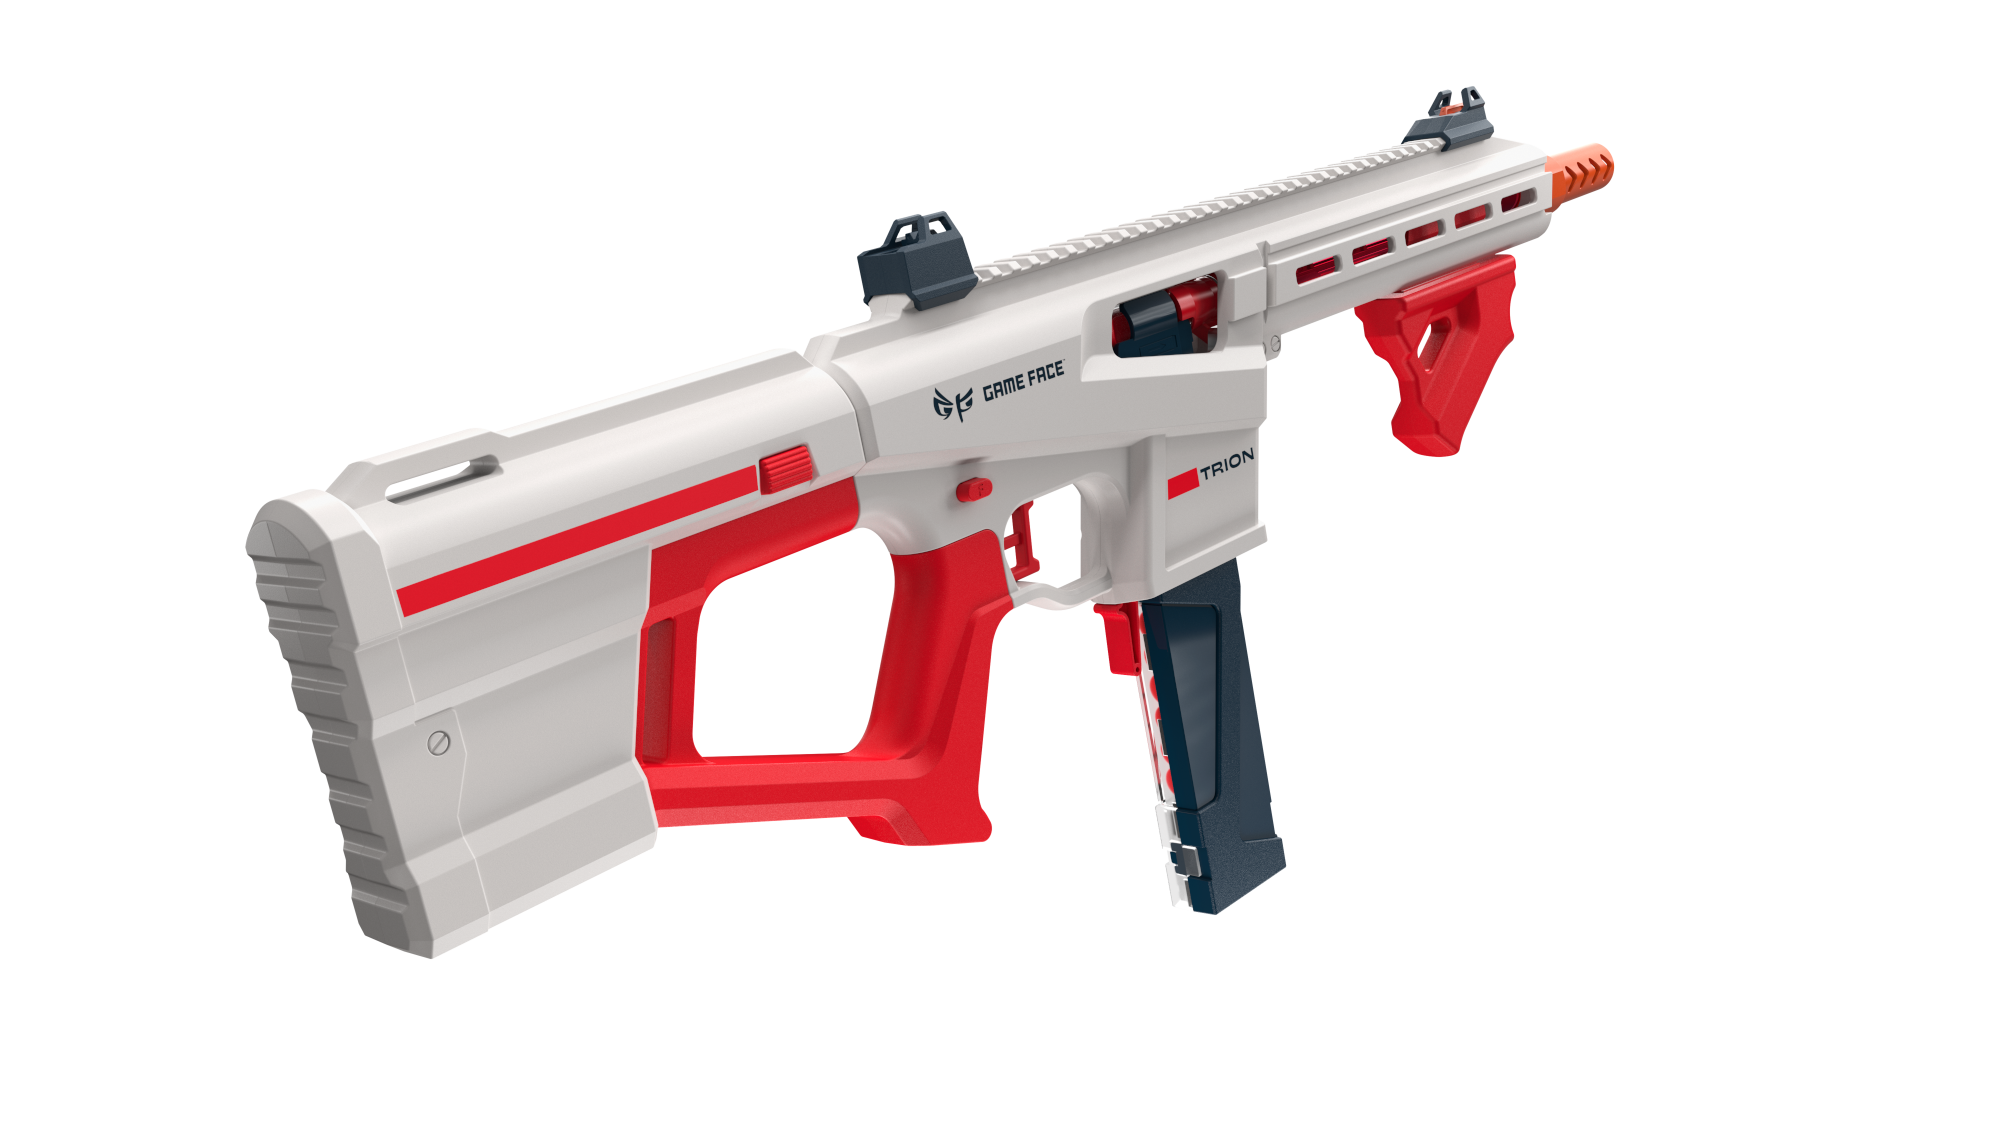 Game Face Trion Competition Foam Dart Blaster, up to 200 FPS, 15 Darts, Ages 14+, Red - image 4 of 9